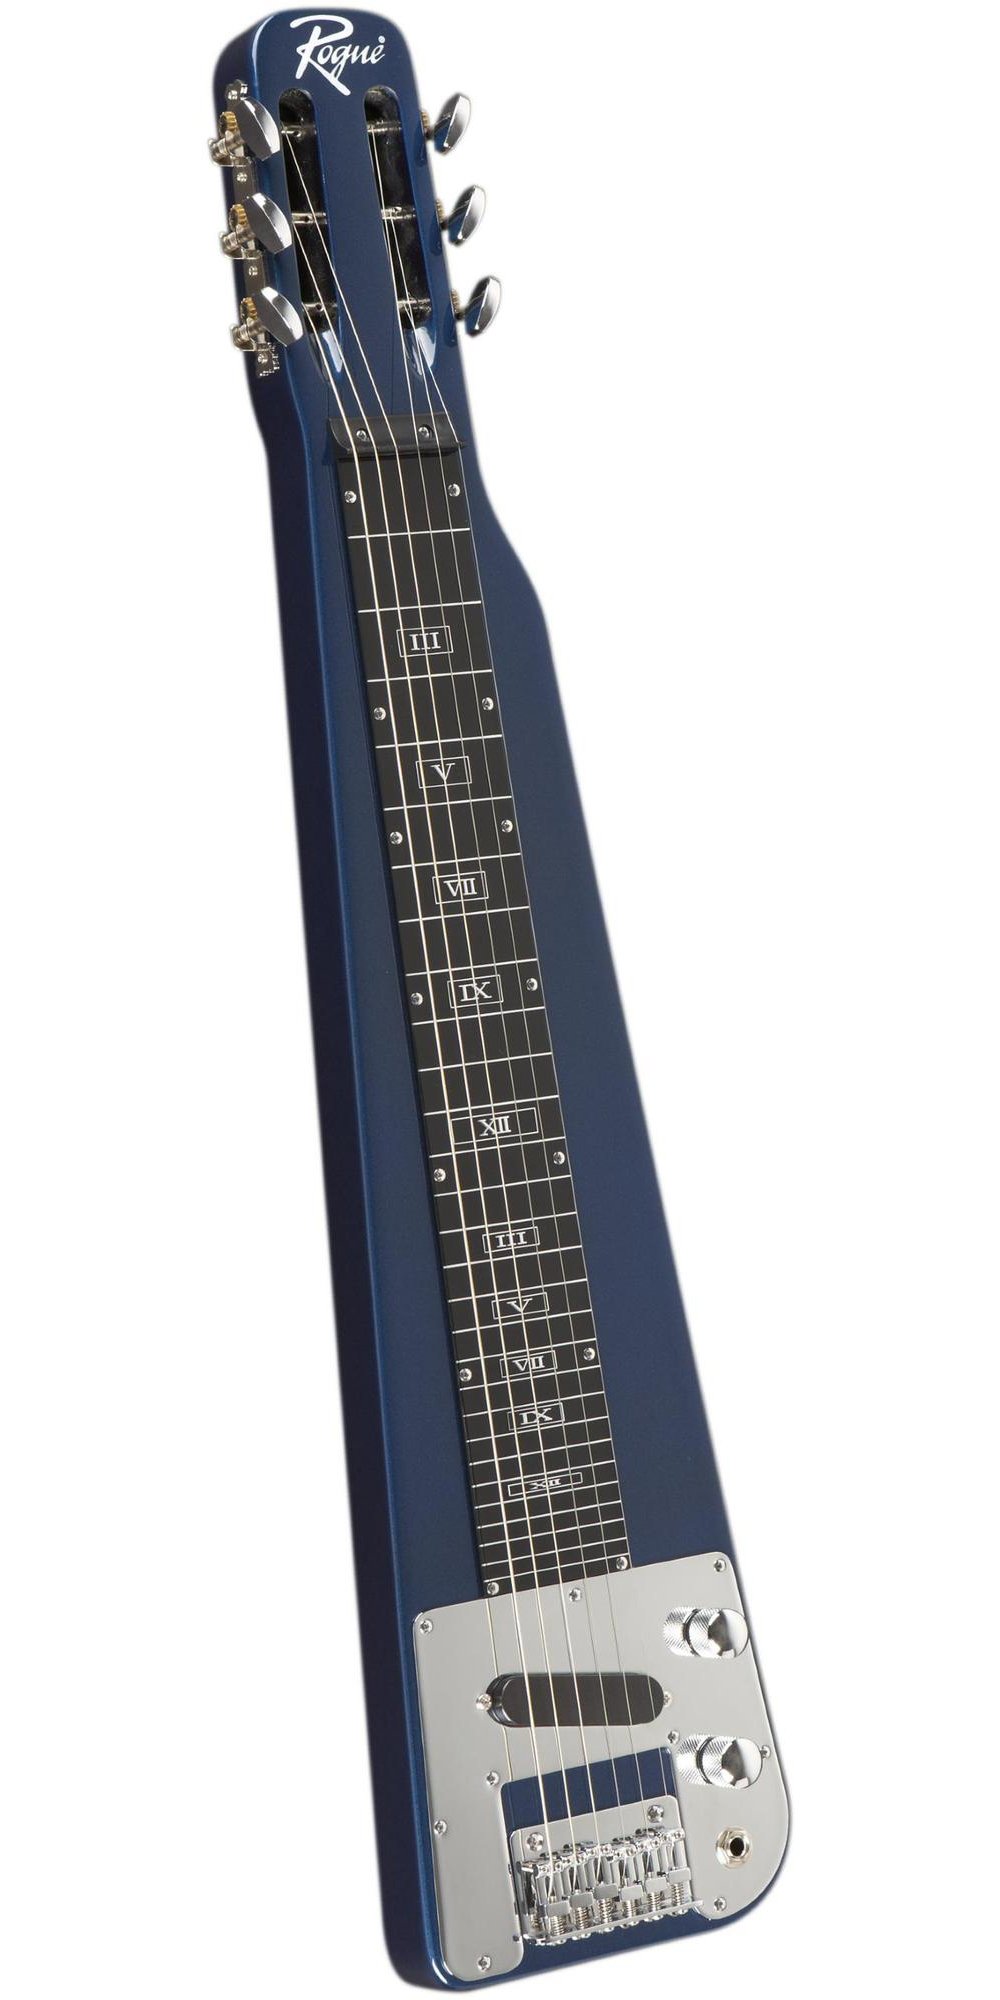 Book Cover Rogue RLS-1 Lap Steel Guitar with Stand and Gig Bag Metallic Blue